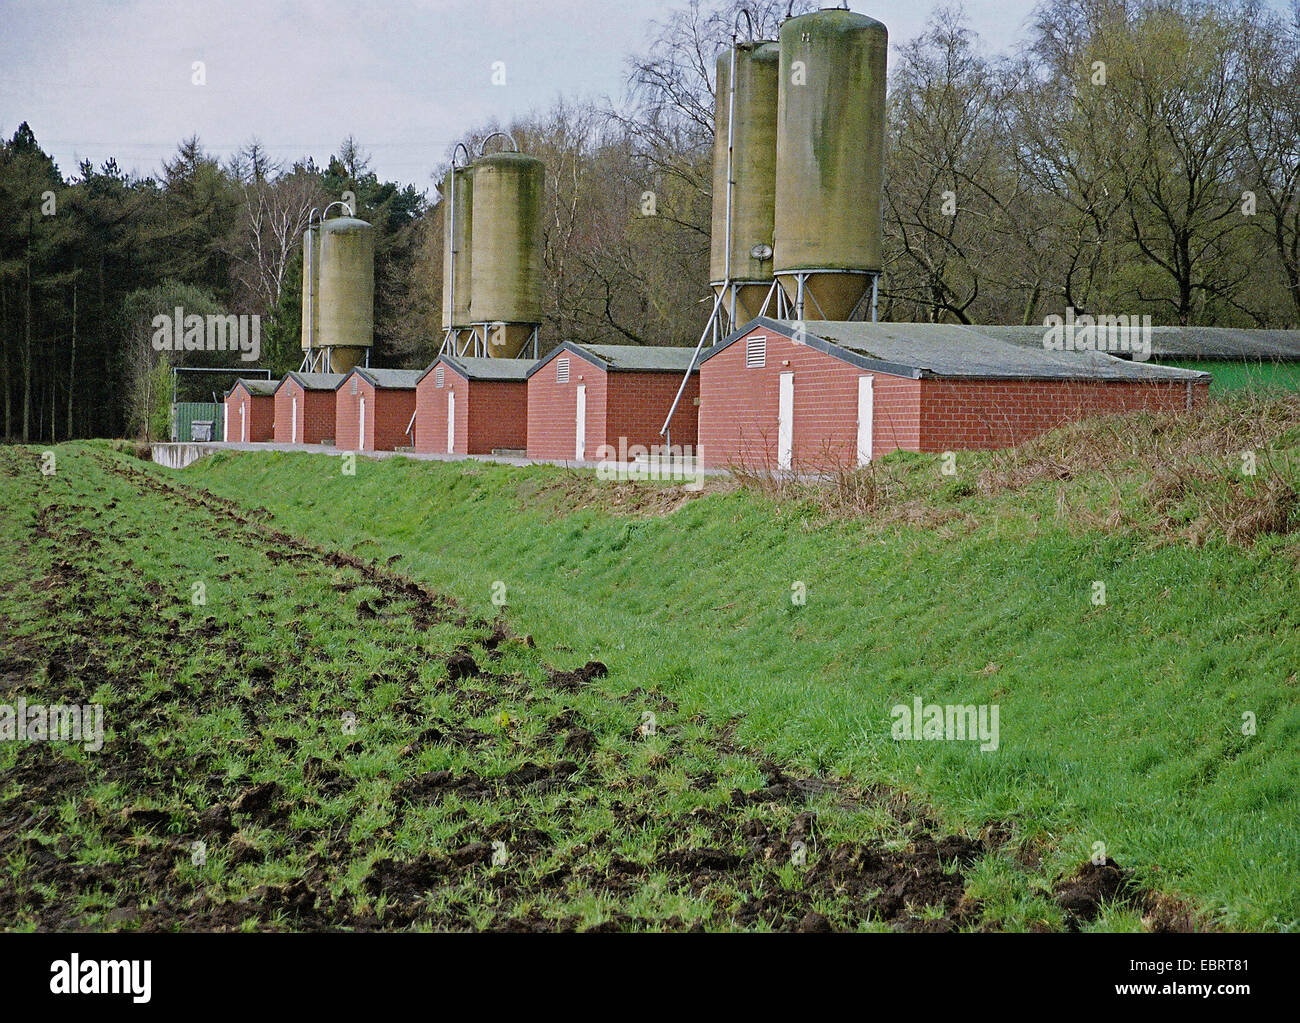 , exterior view of chicken farming, Germany, Stock Photo